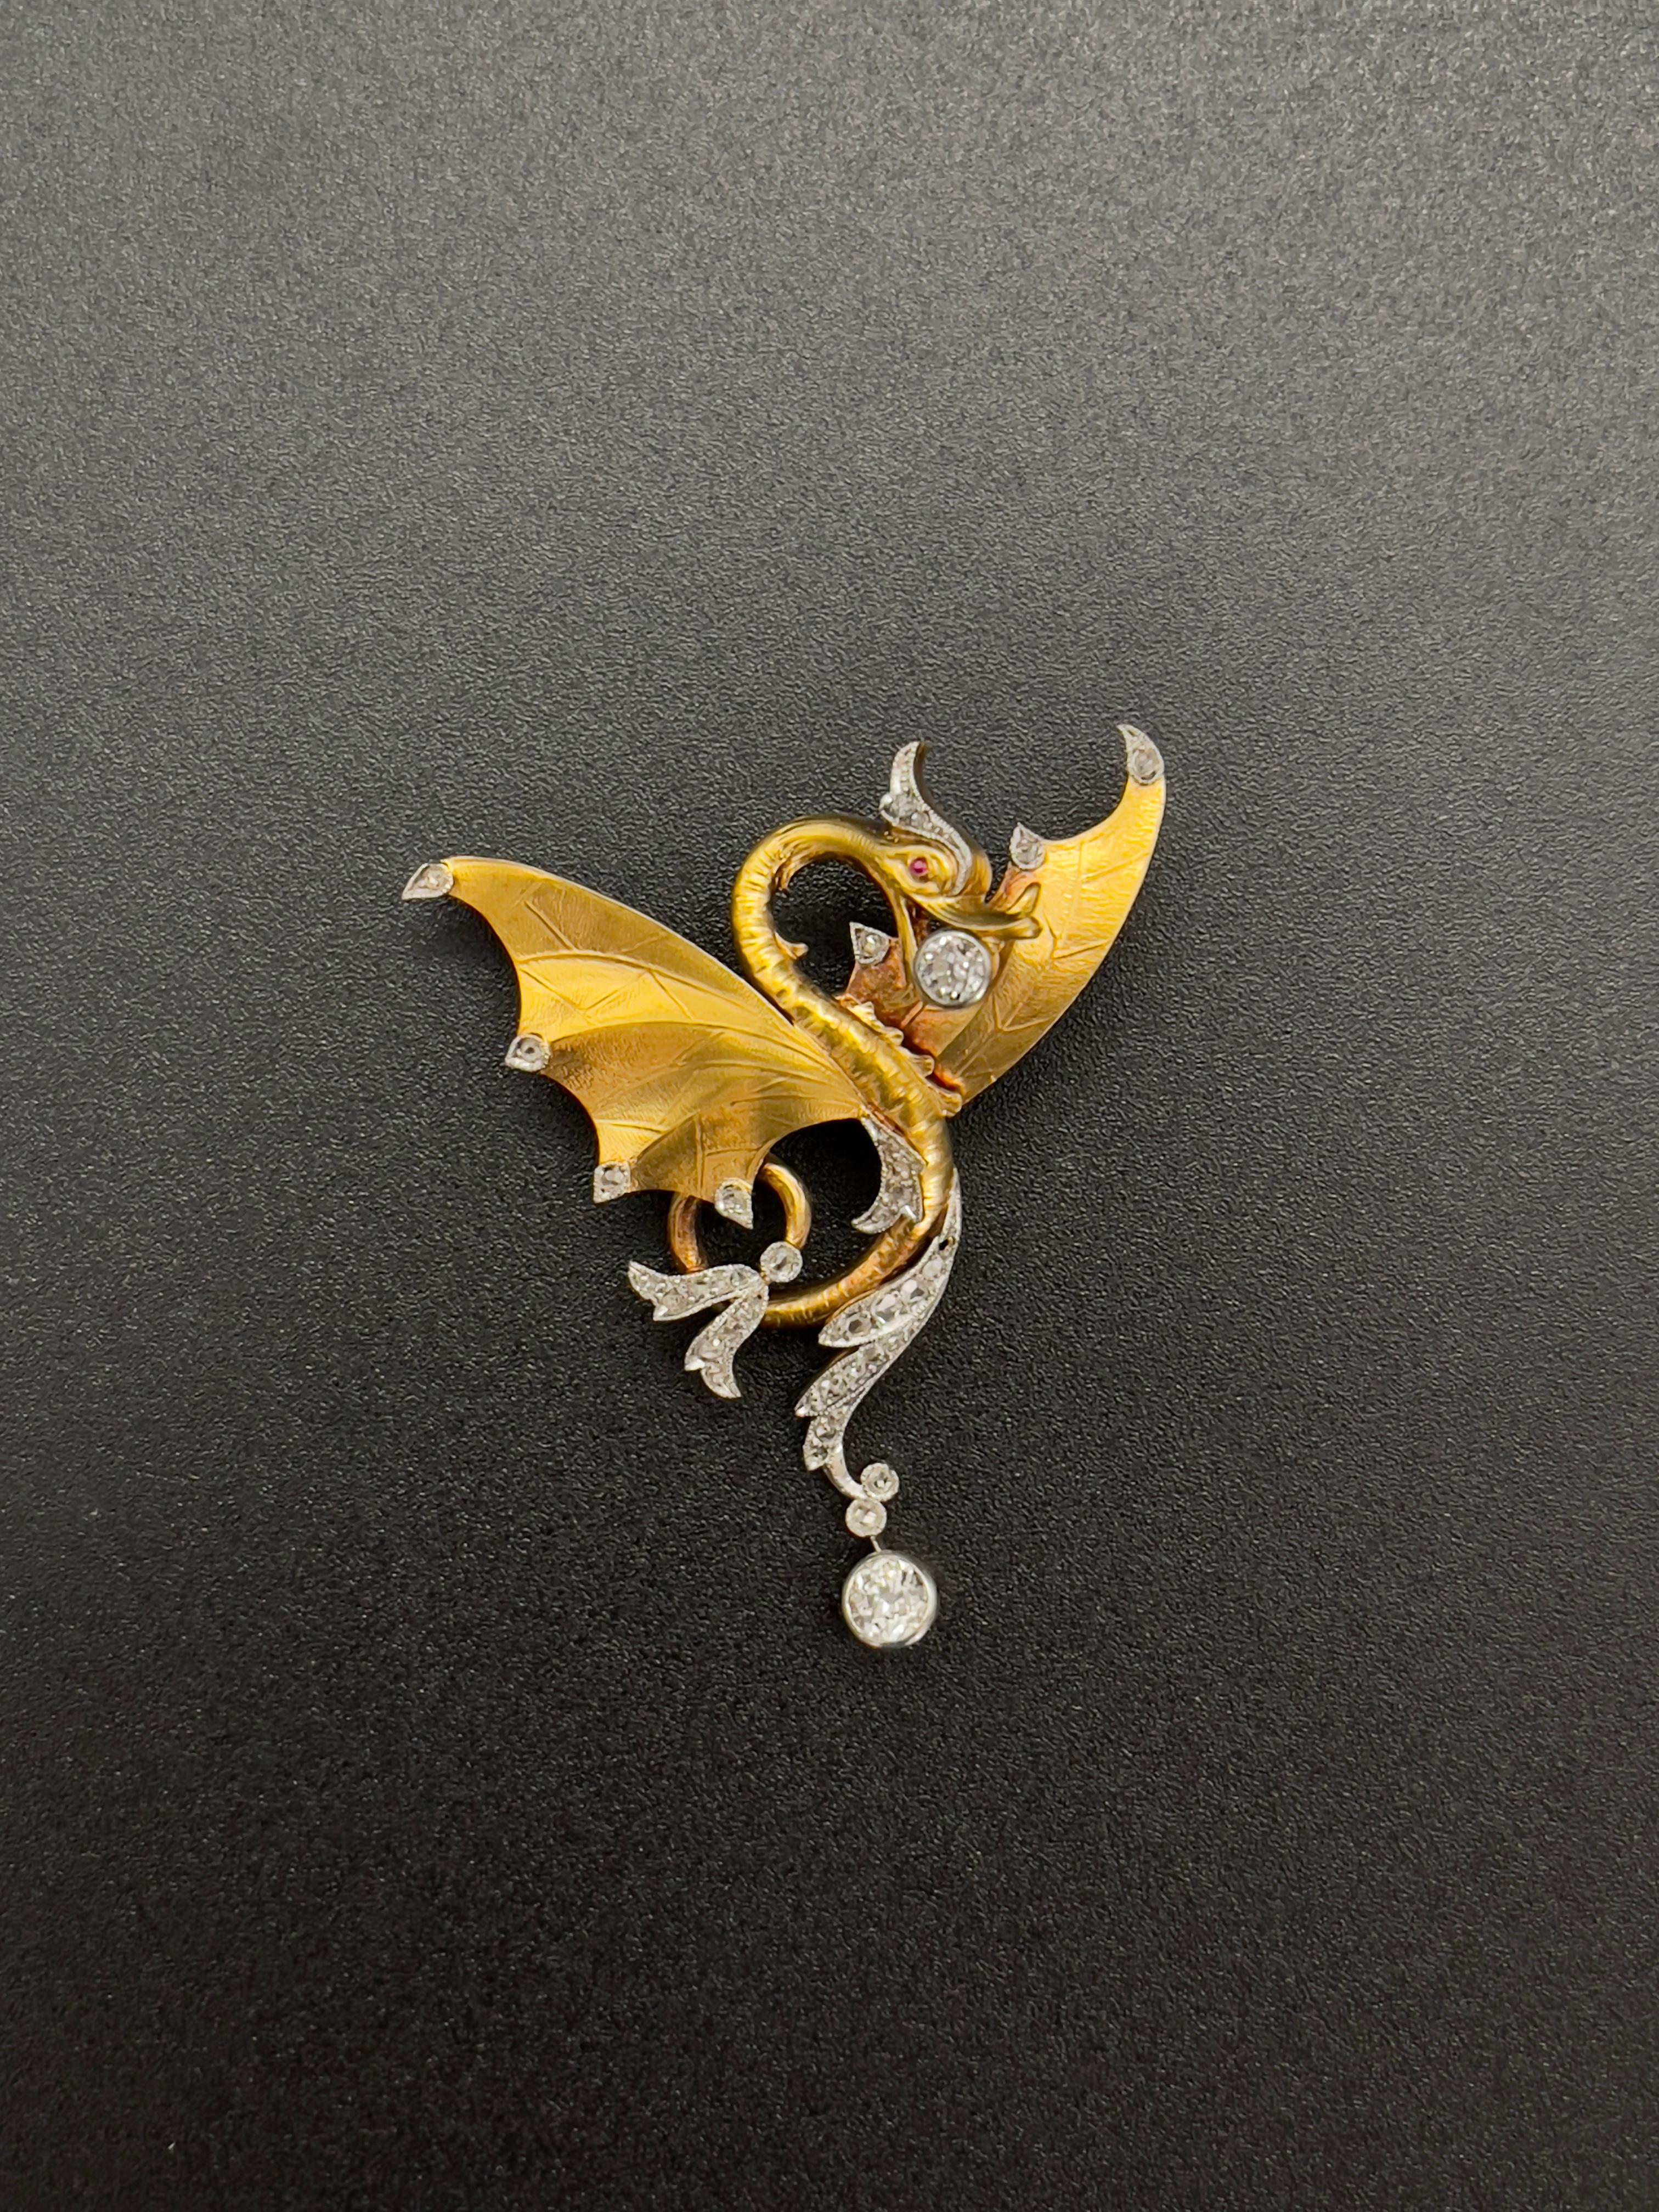 A Breathtaking and Unique - Pendant or Brooch, Imperial Dragon in a Flying pose from the late nineteenth century.

This fabulous mythological creature is artfully designed and rendered in 19.2 Karat Portuguese gold, sparkles with two main brilliant